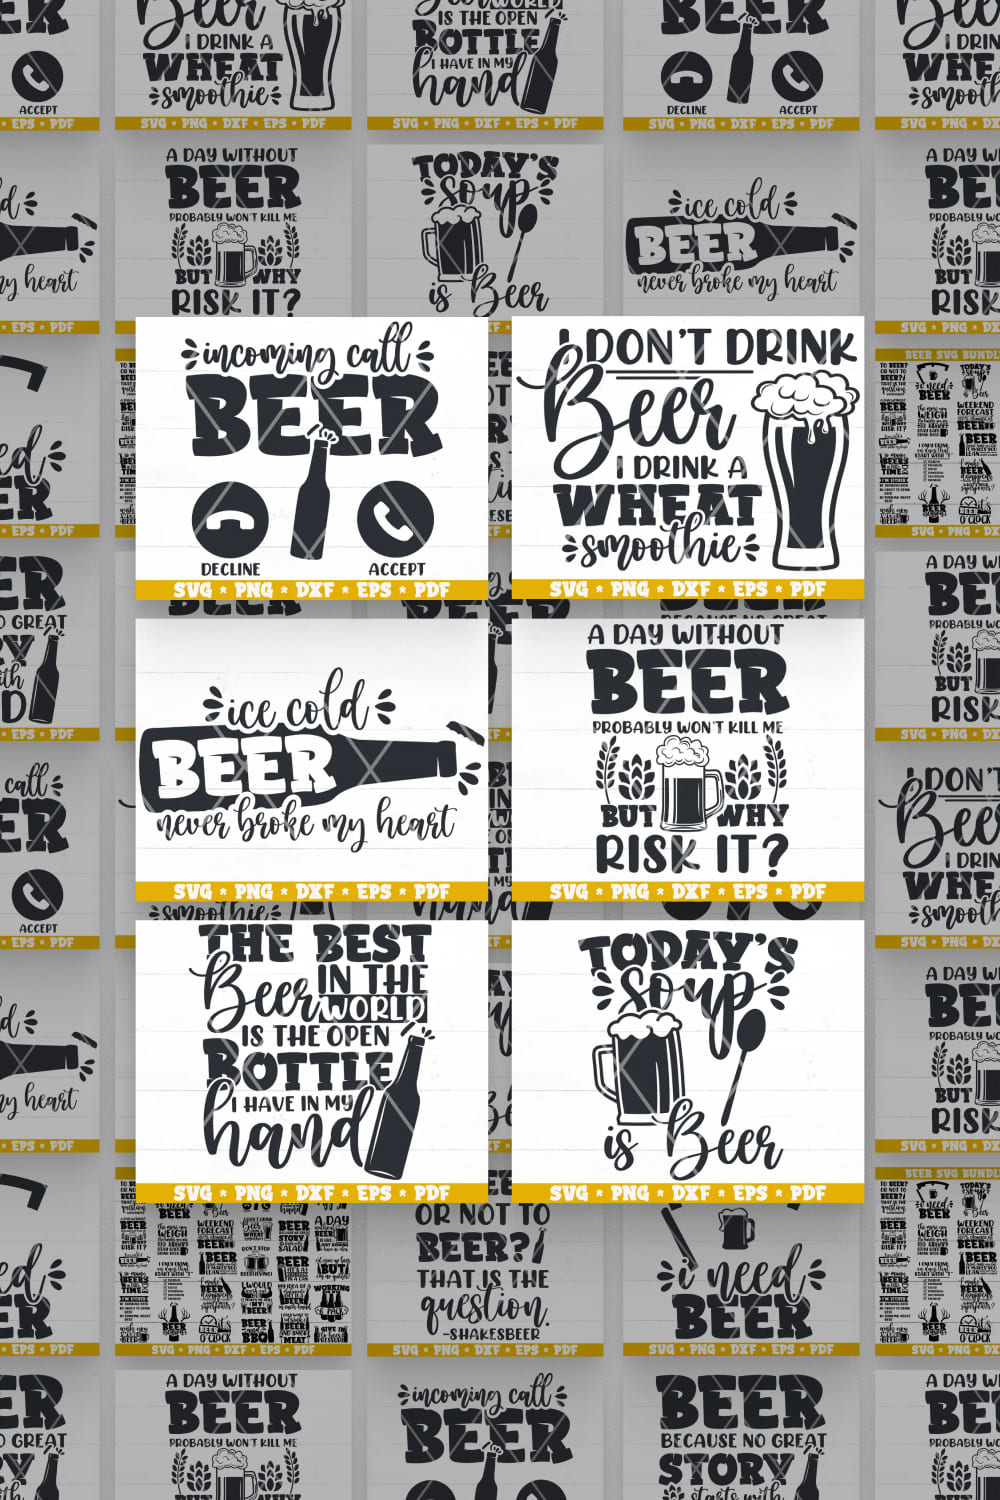 Beer illustrations and quotes.